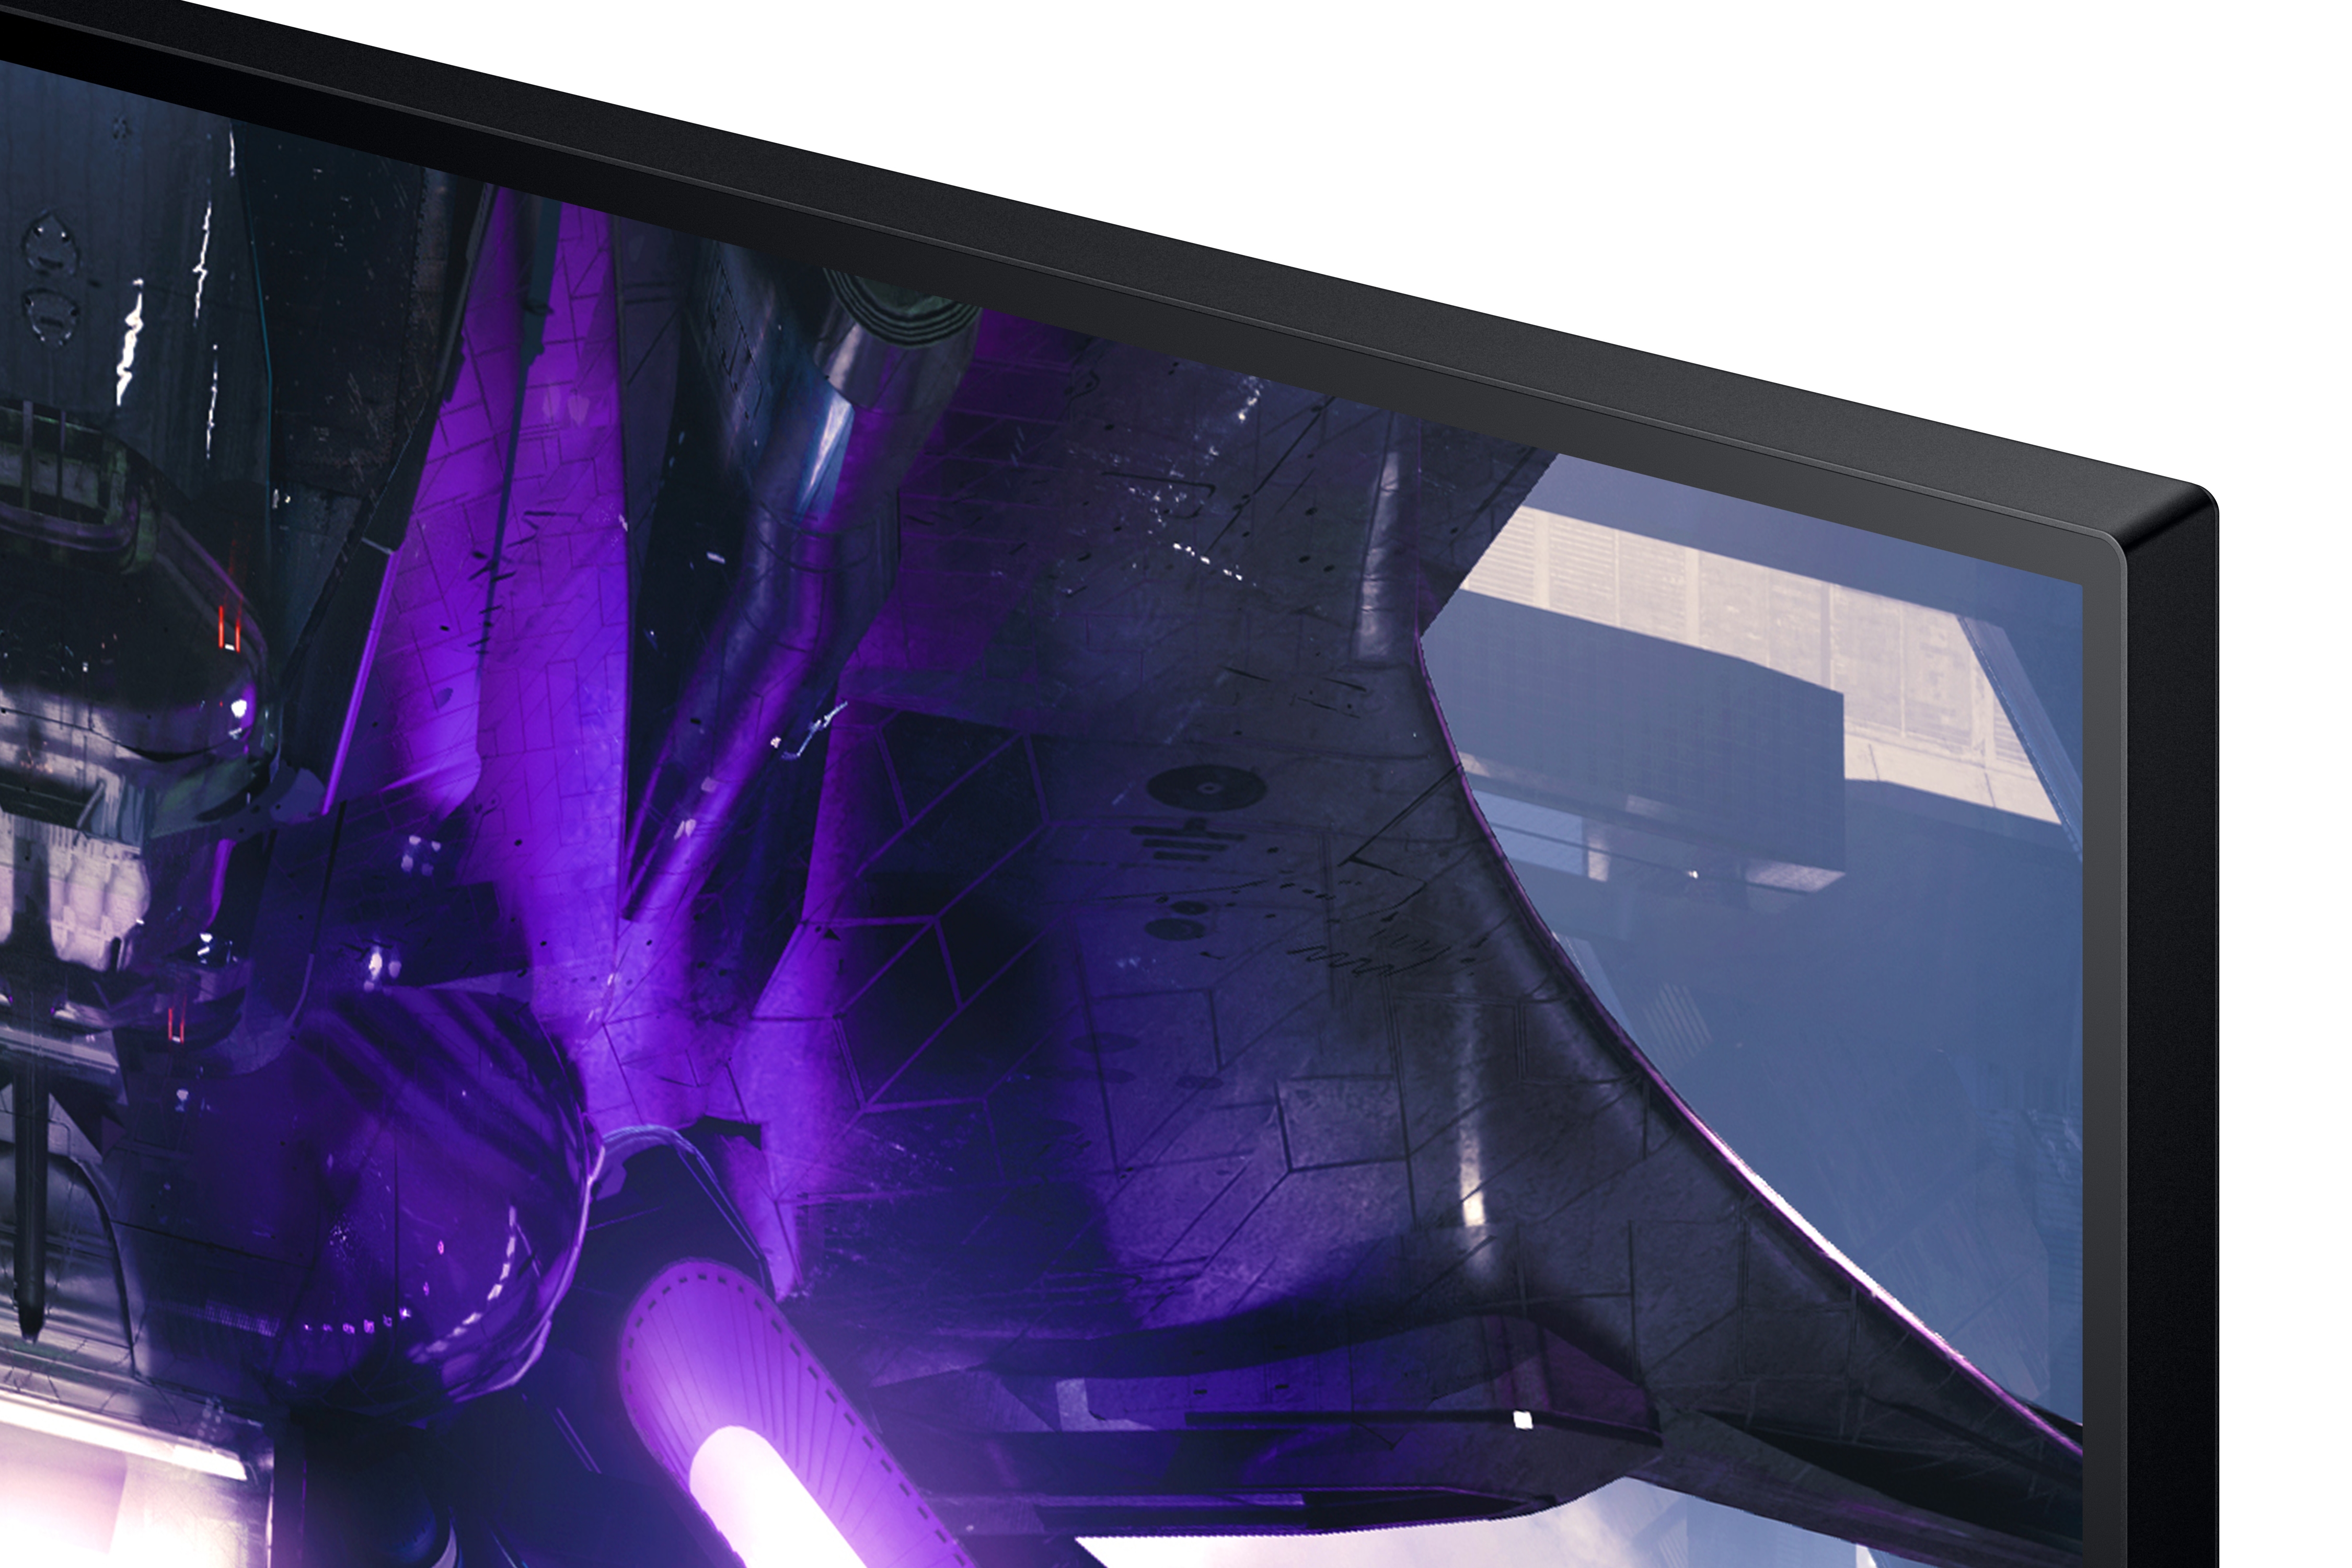 Thumbnail image of 32” Odyssey G32A FHD 165Hz 1ms Gaming Monitor